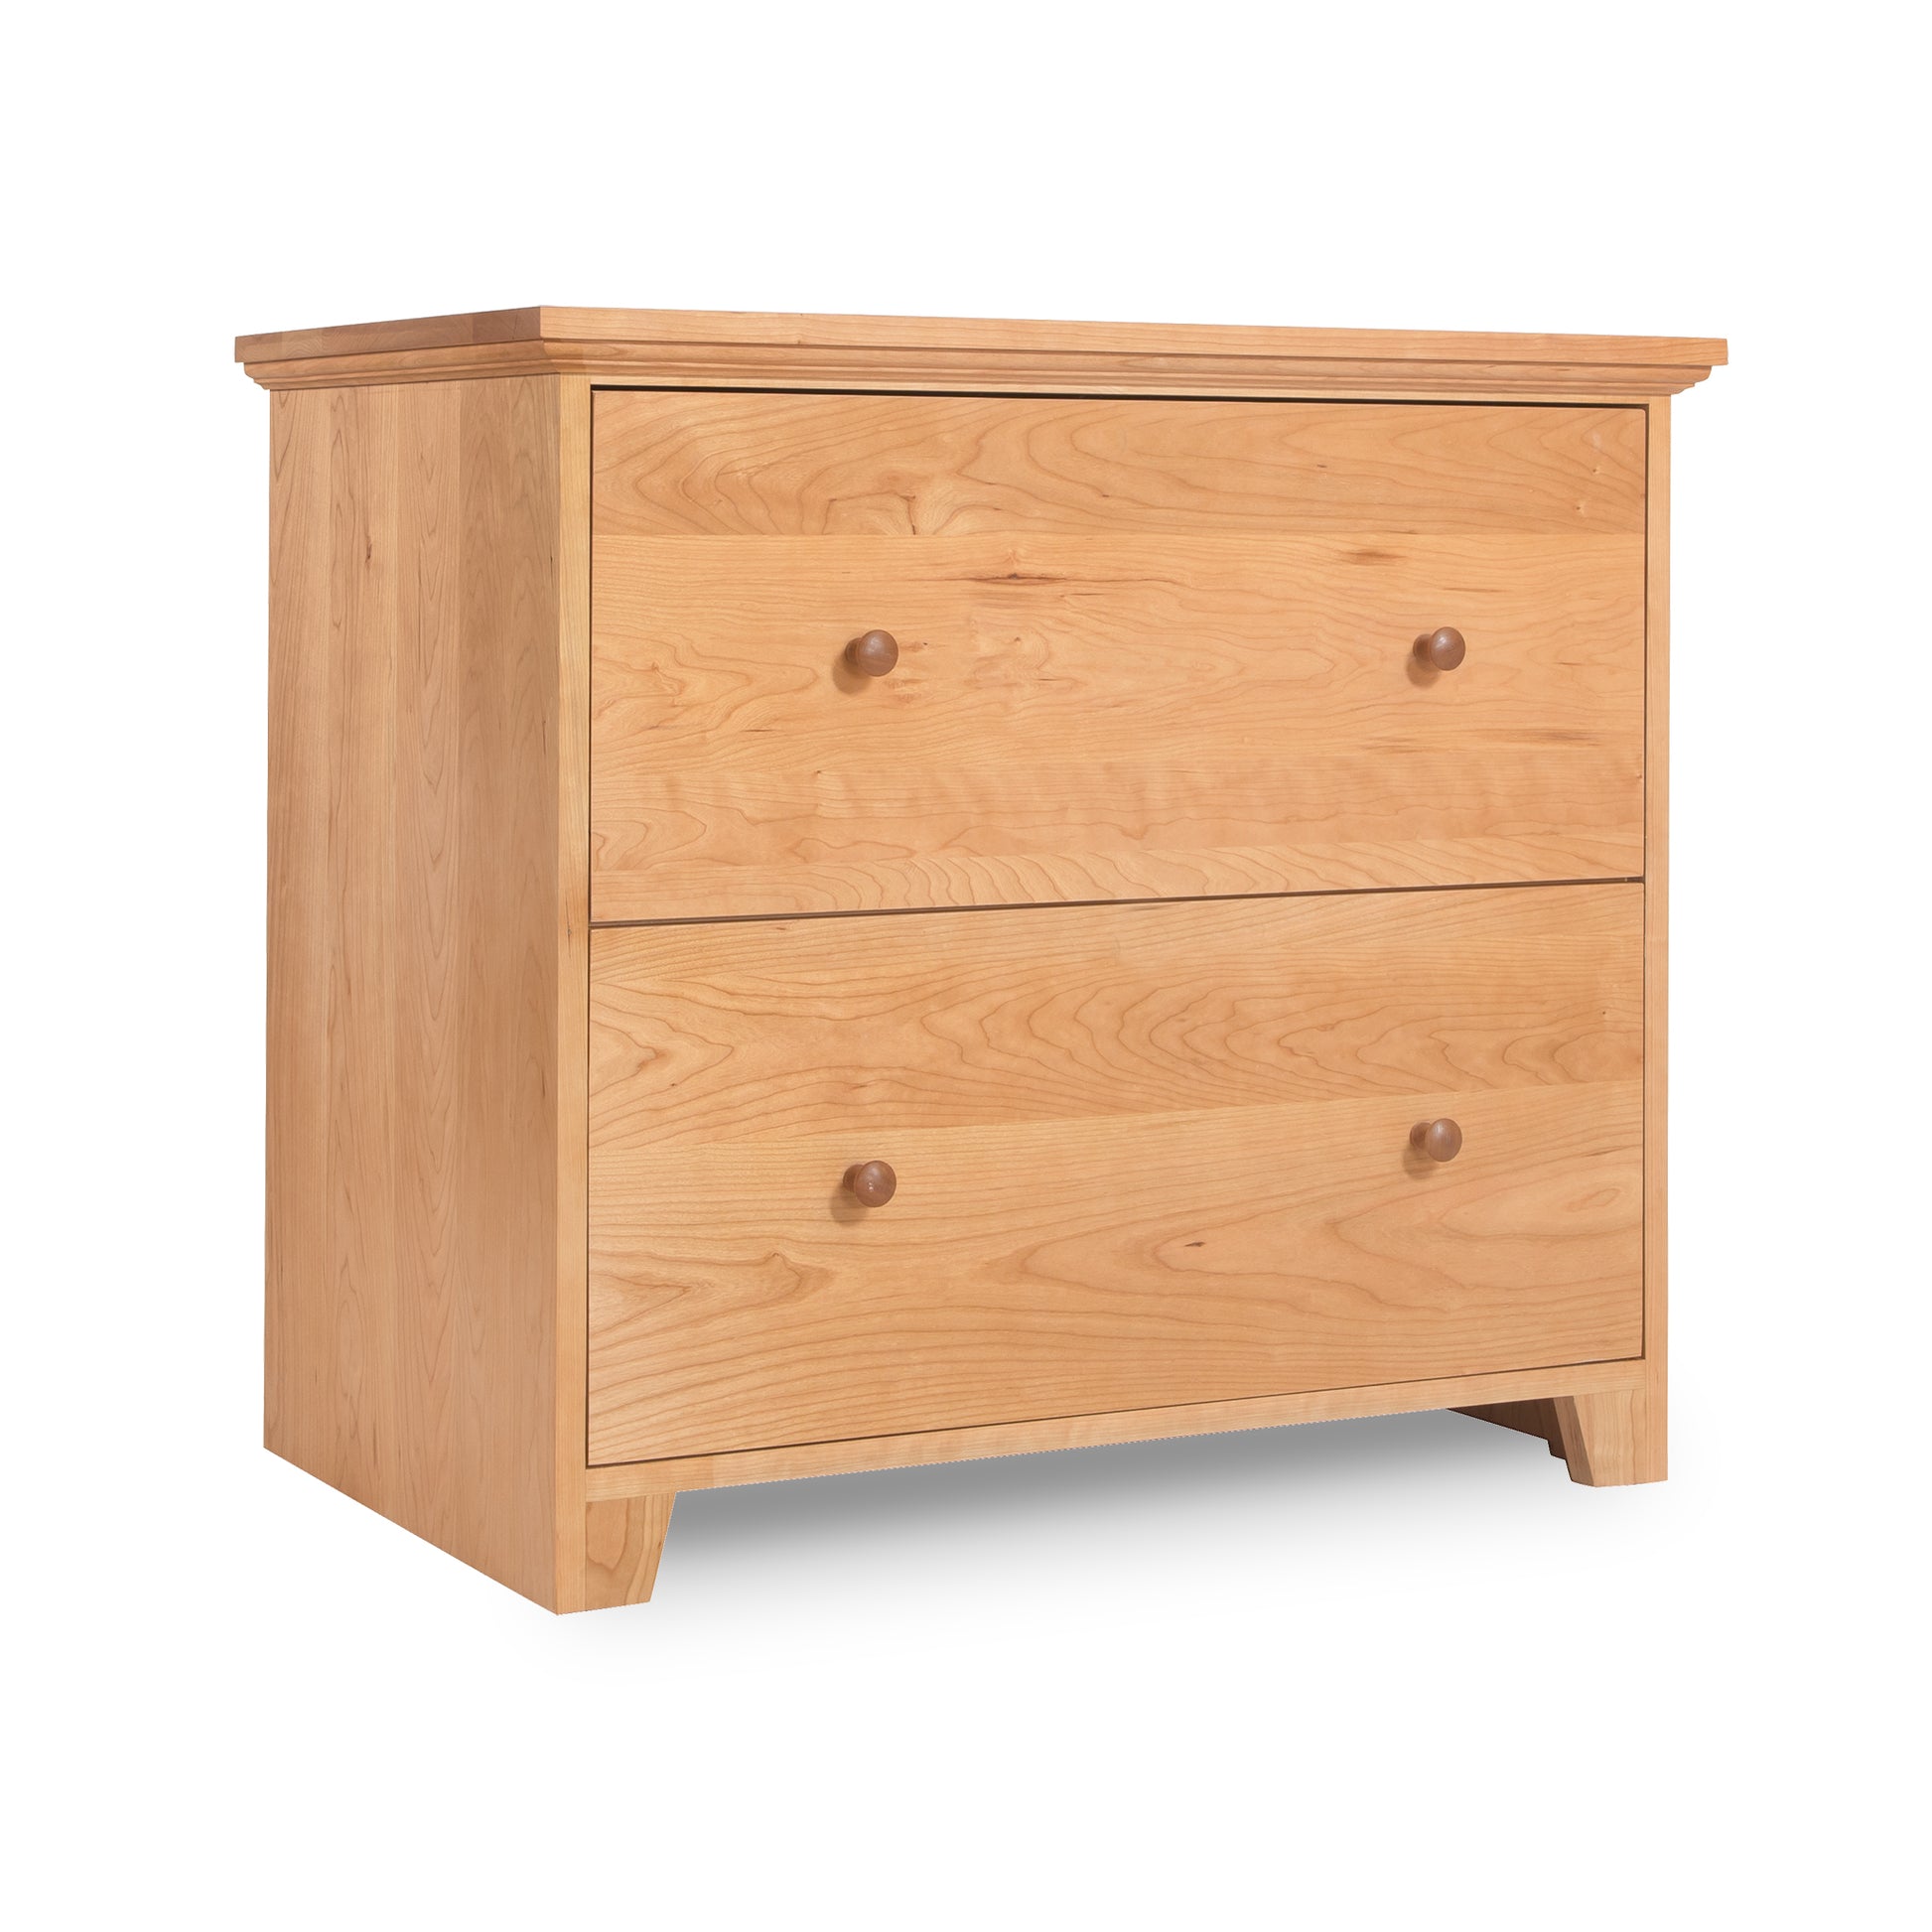 A Lyndon Furniture Shaker 2-Drawer Lateral File Cabinet on a white background, made of cherry wood.